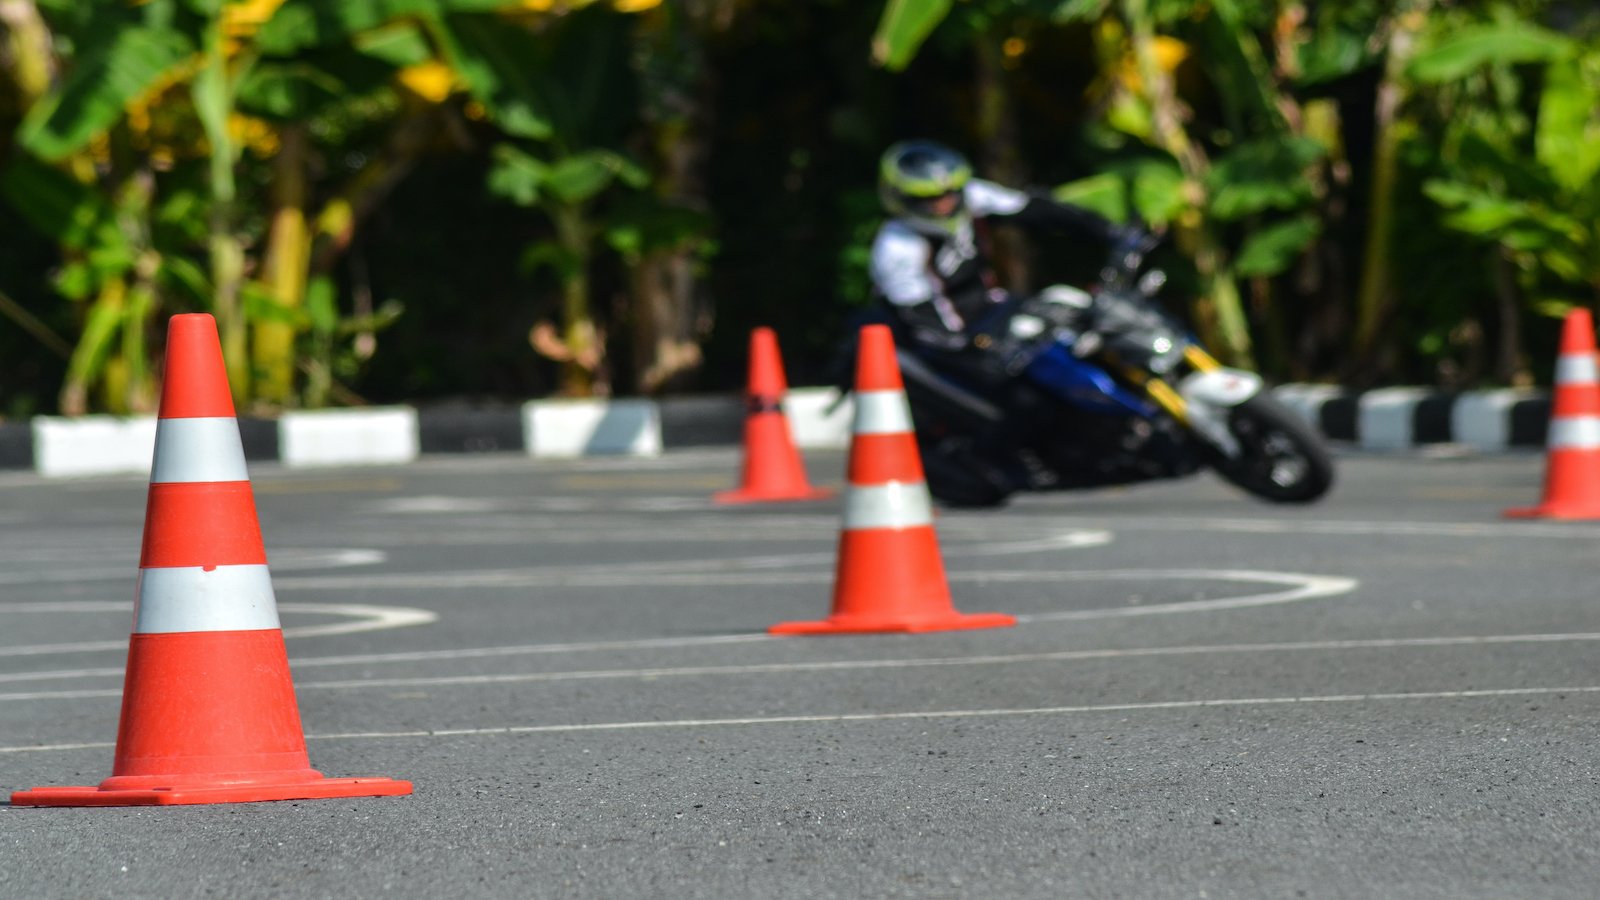 Motorcycle Safety Course 301 - Training is a Journey, Not a Destination